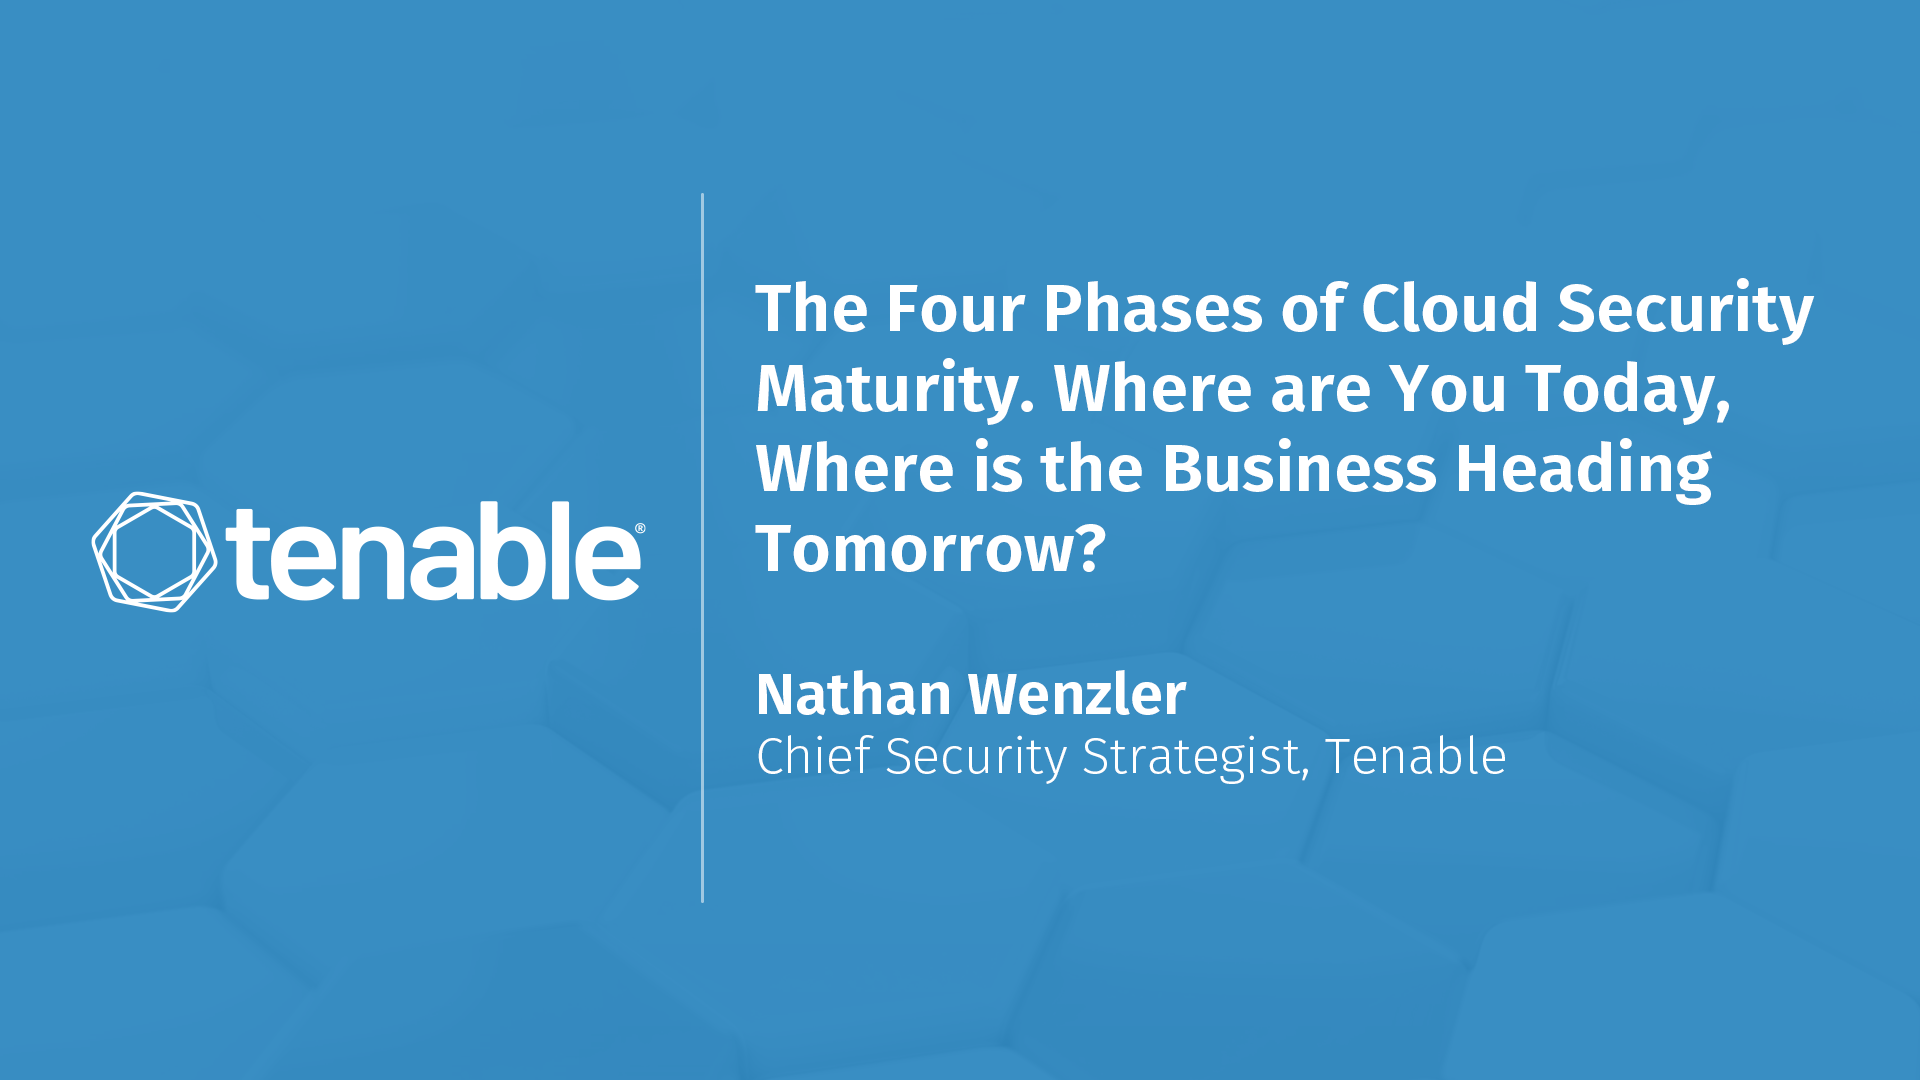 The Four Phases of Cloud Security Maturity